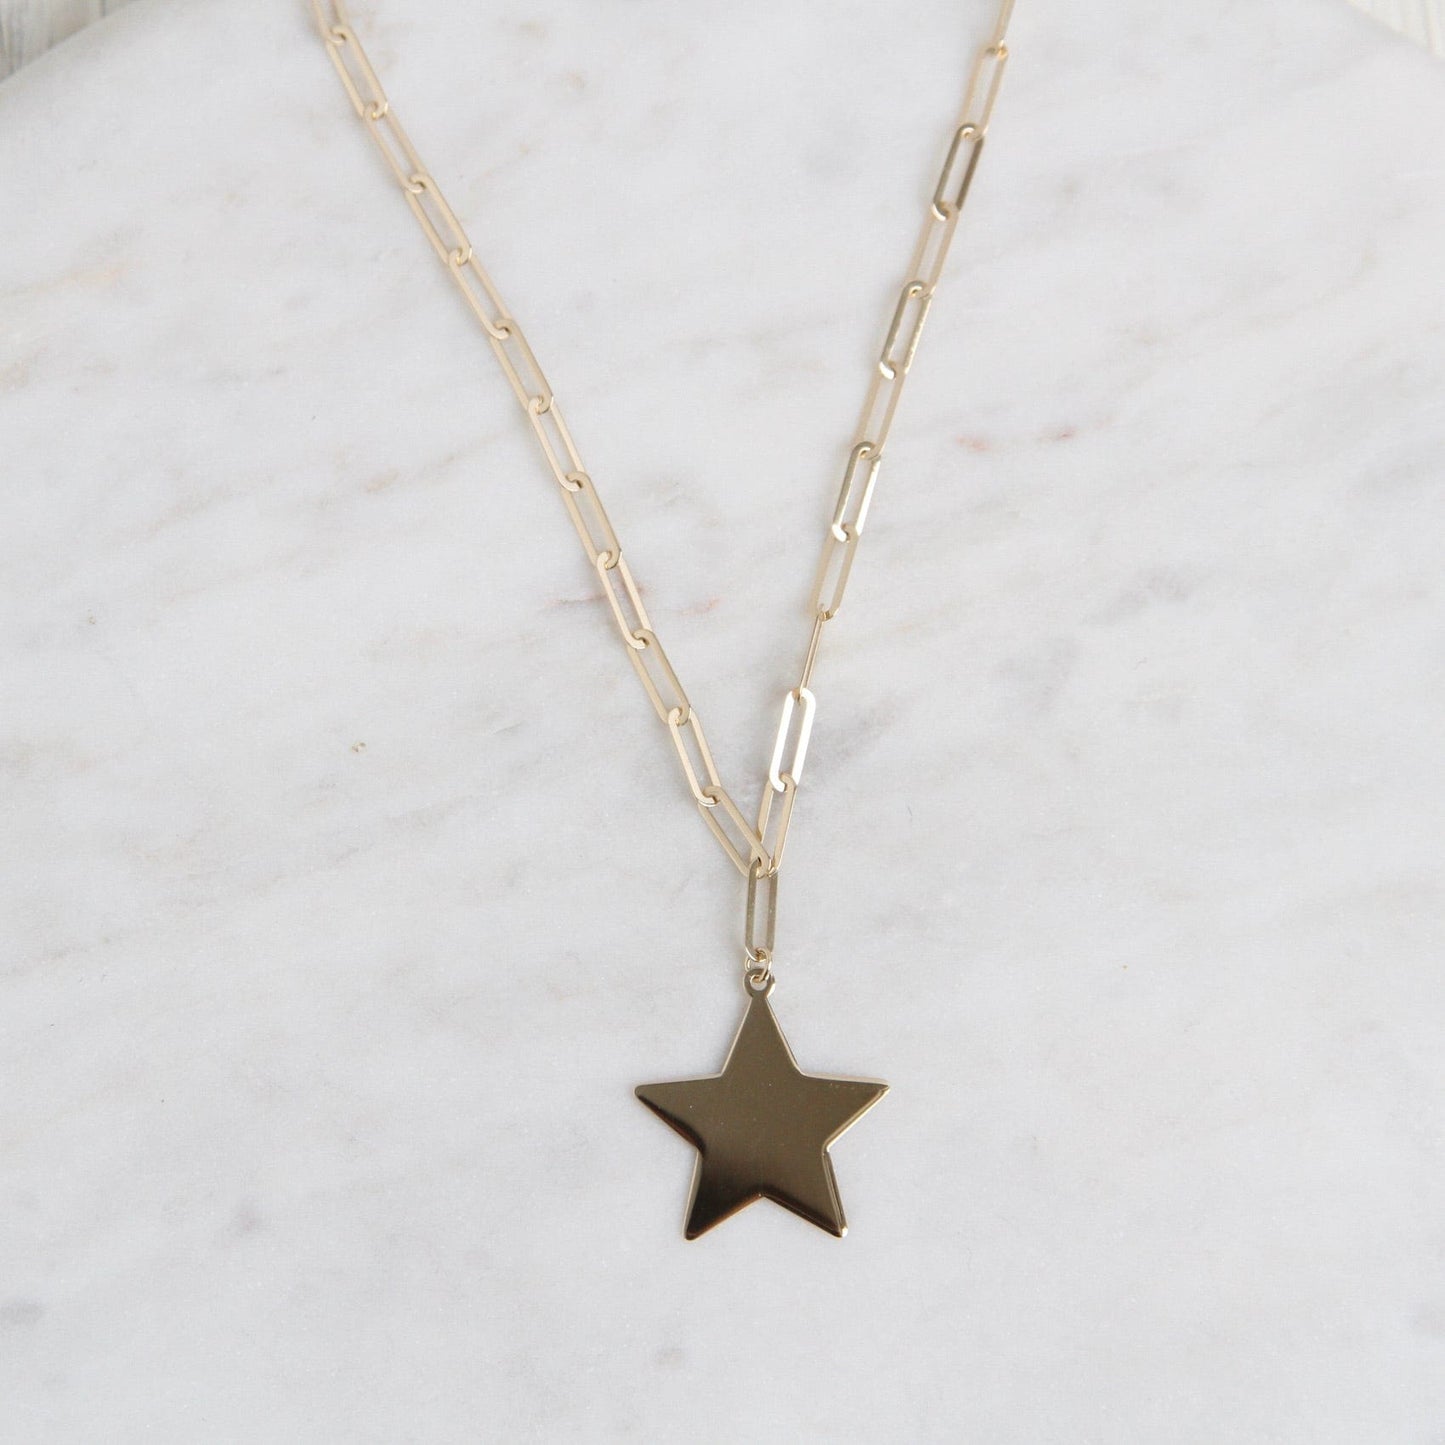 NKL-14K 14k Yellow Gold Paperclip Chain with Star Pendant